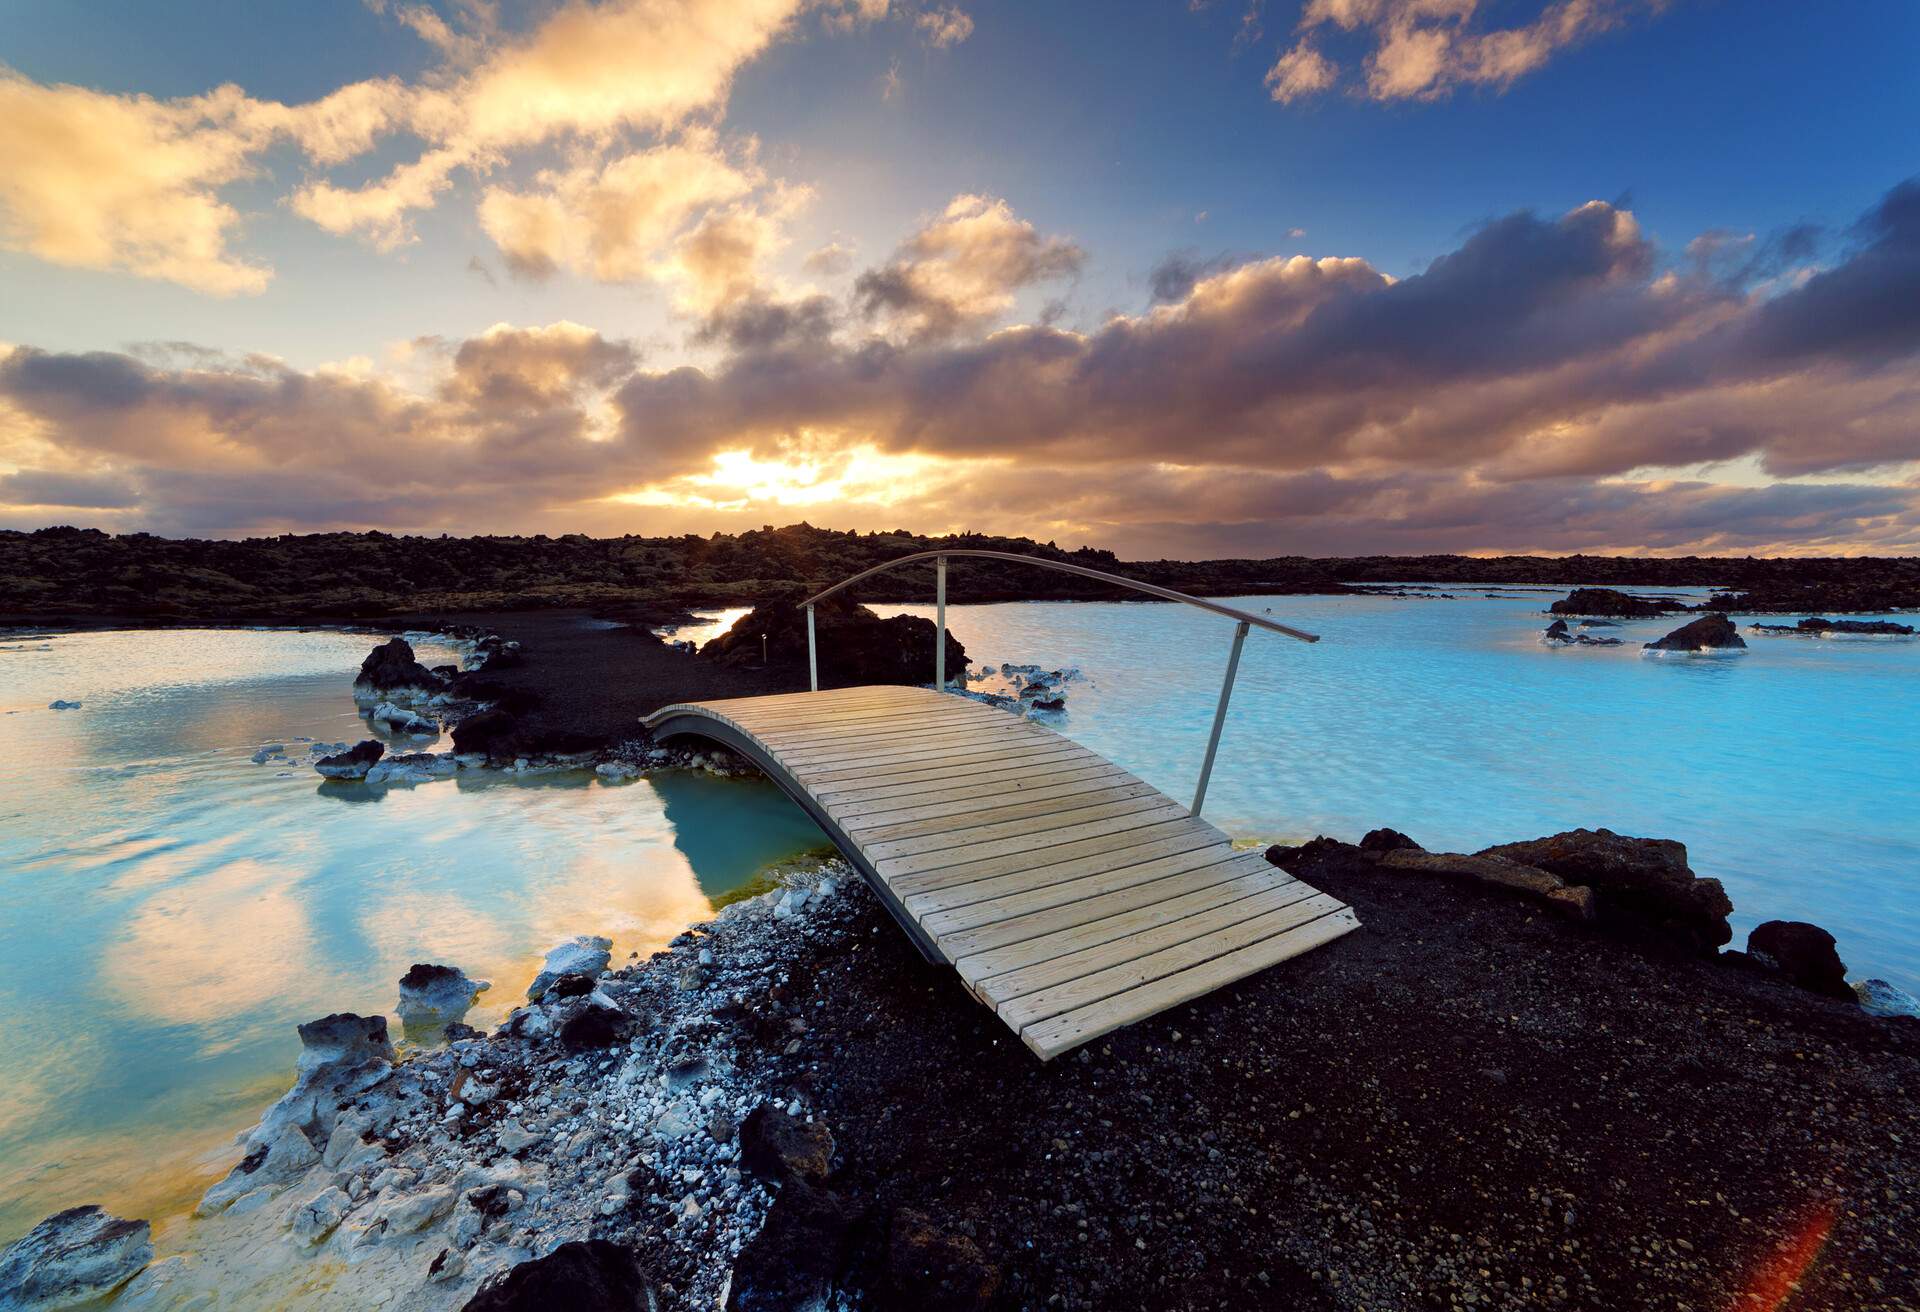 Sunset over railed footbridge surrounded by volcanic landscape at Blue Lagoon, Iceland, with aquamarine water reflecting colors of spring sunset.